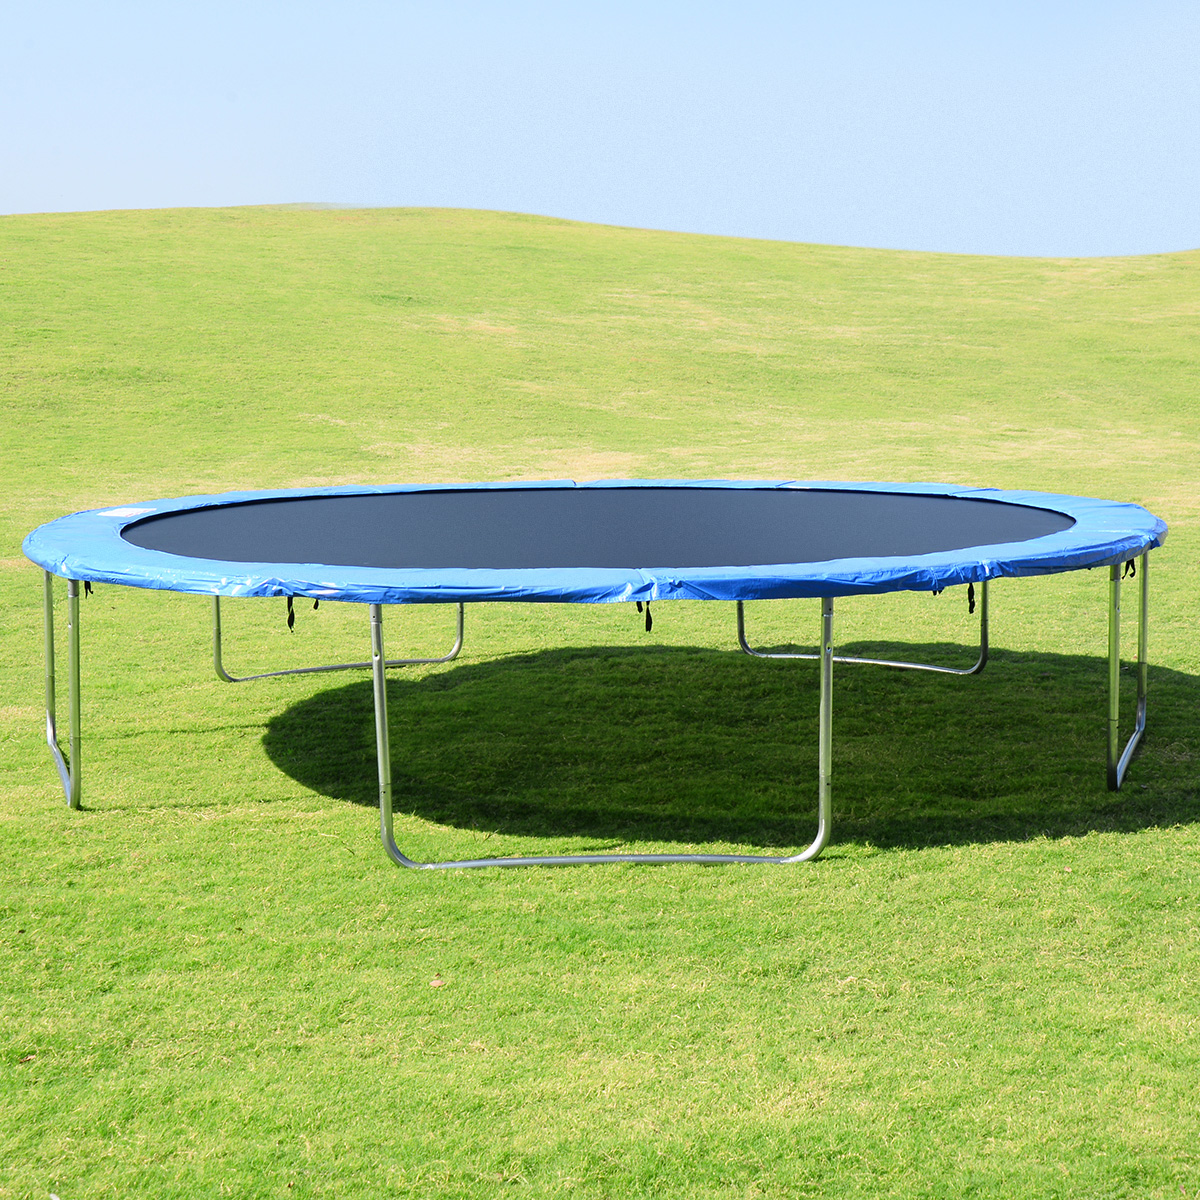 Gymax 15 FT Trampoline Combo Bounce Jump Safety Enclosure Net - image 5 of 10